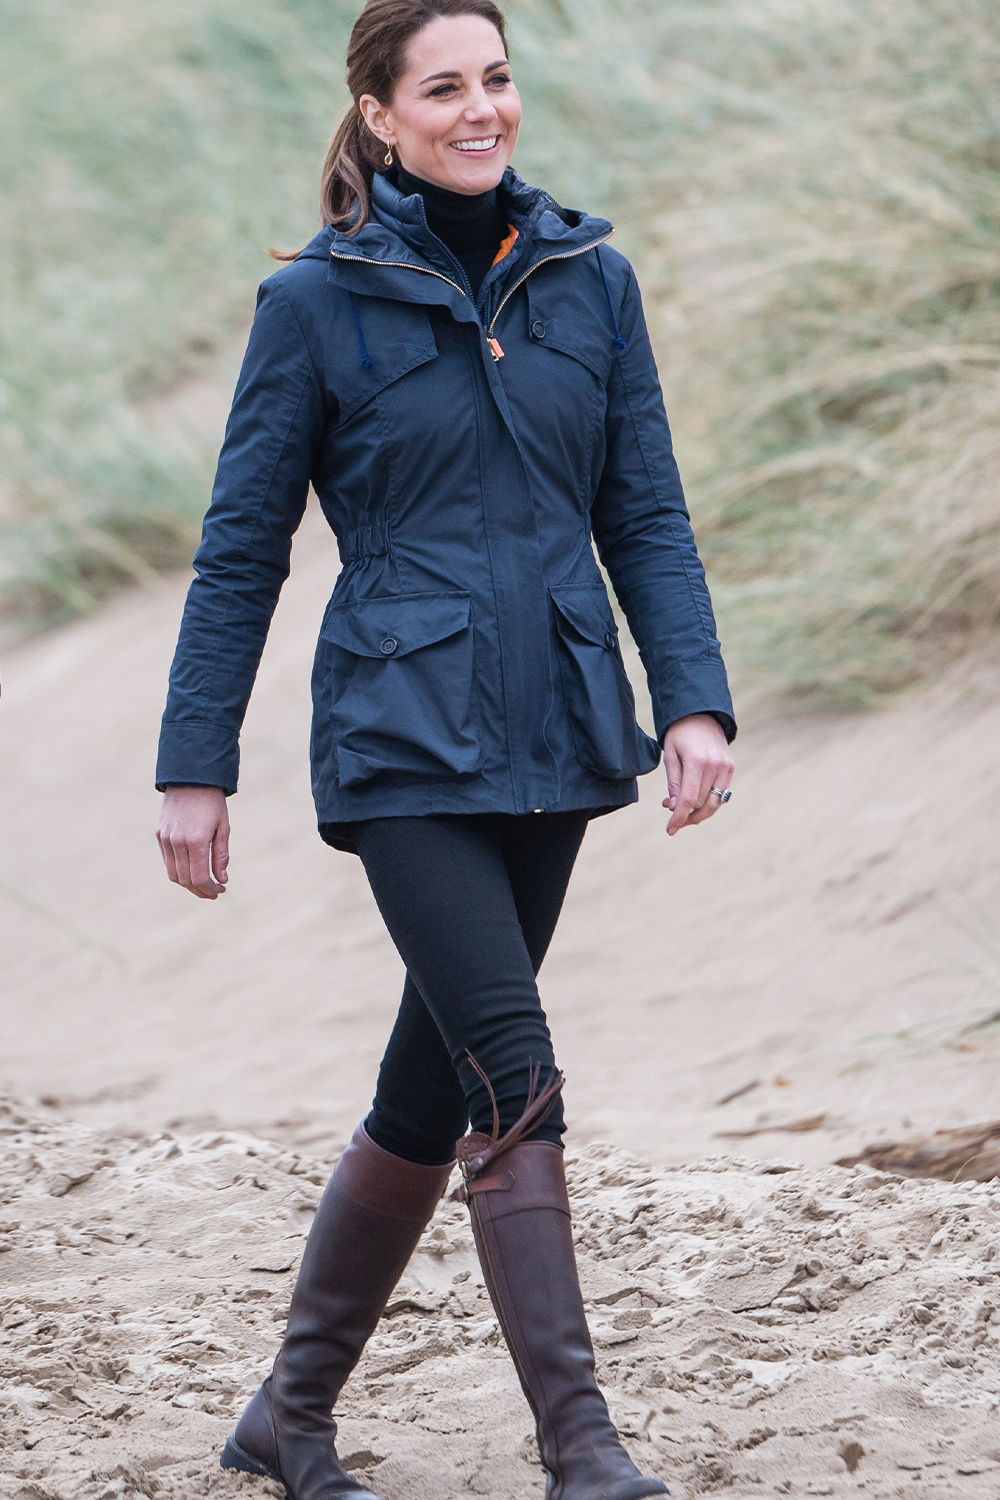 Kate Middleton Style: Riding Boots Trend